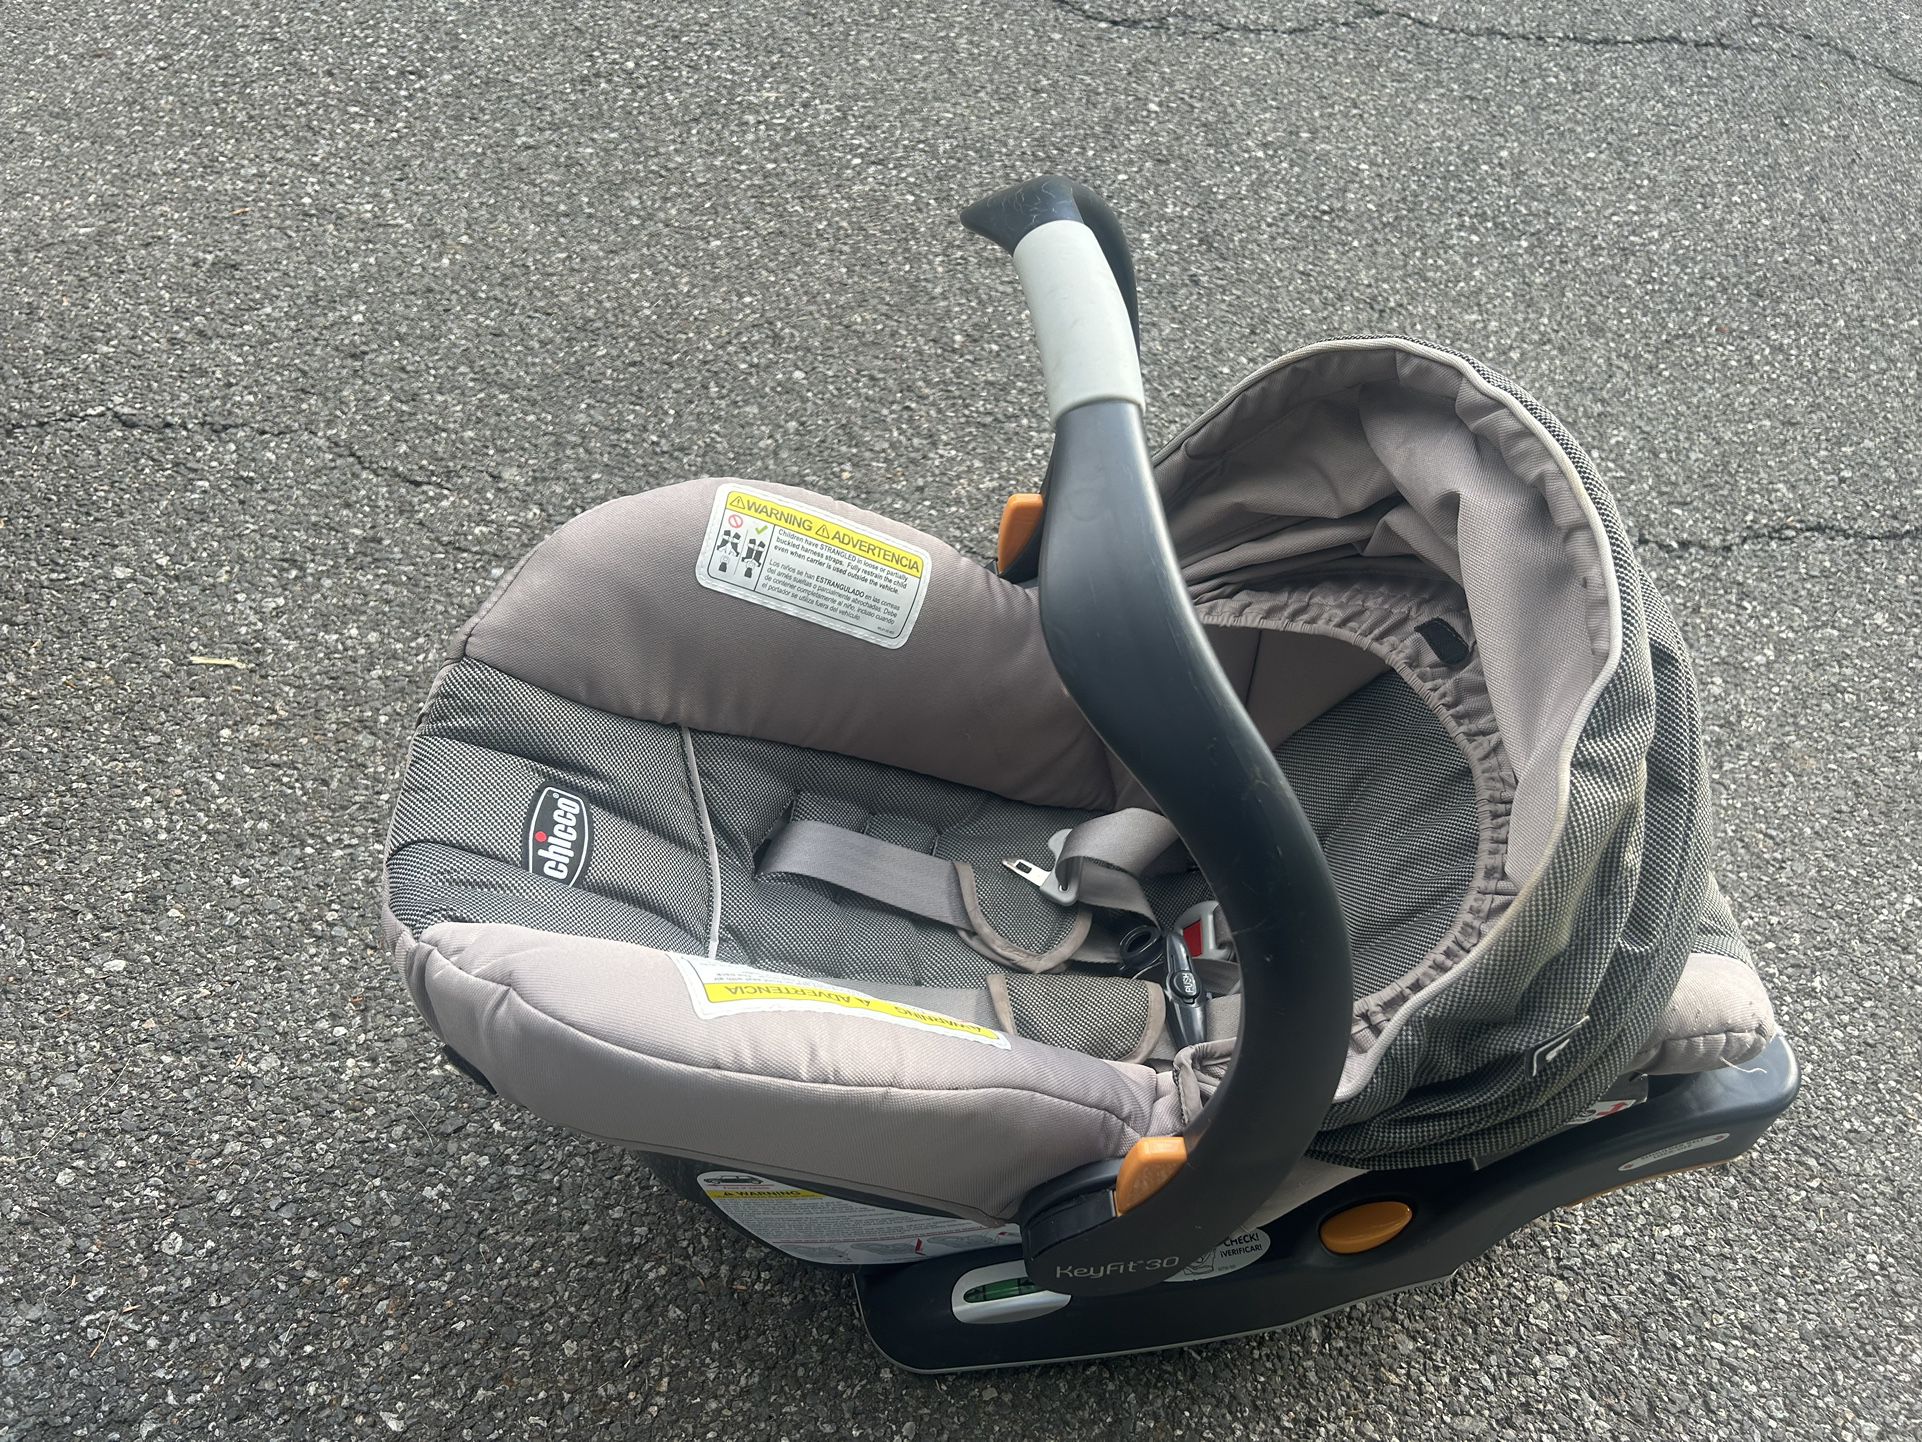 Chico Keyfit 30 Base And Car Seat